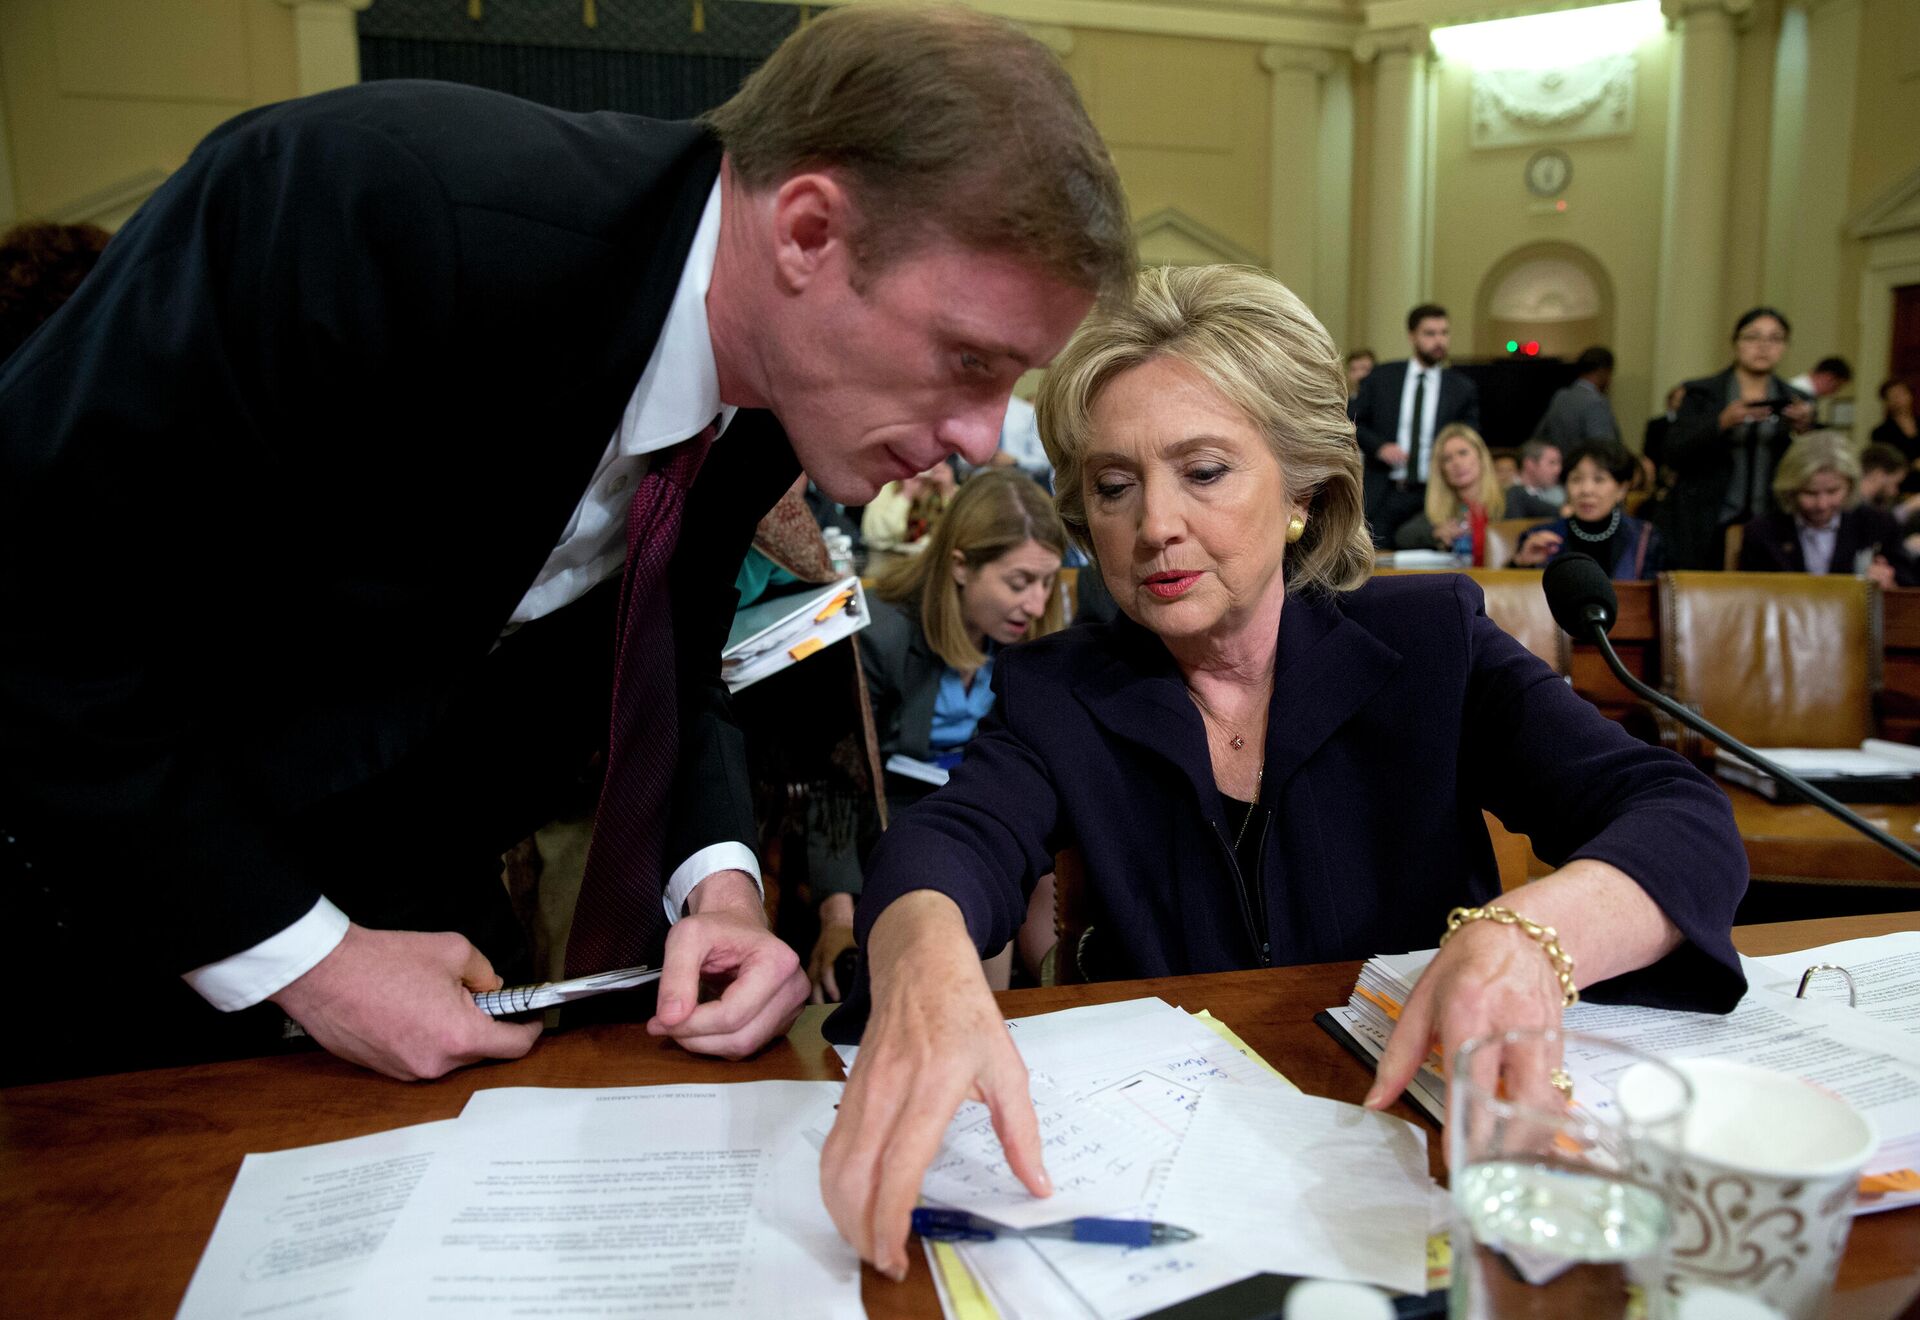 Democratic presidential candidate former Secretary of State Hillary Rodham Clinton talks with Jake Sullivan, a former staff member for her at the State Department, during a break in testimony on Capitol Hill in Washington, Thursday, Oct. 22, 2015 - Sputnik International, 1920, 25.03.2022